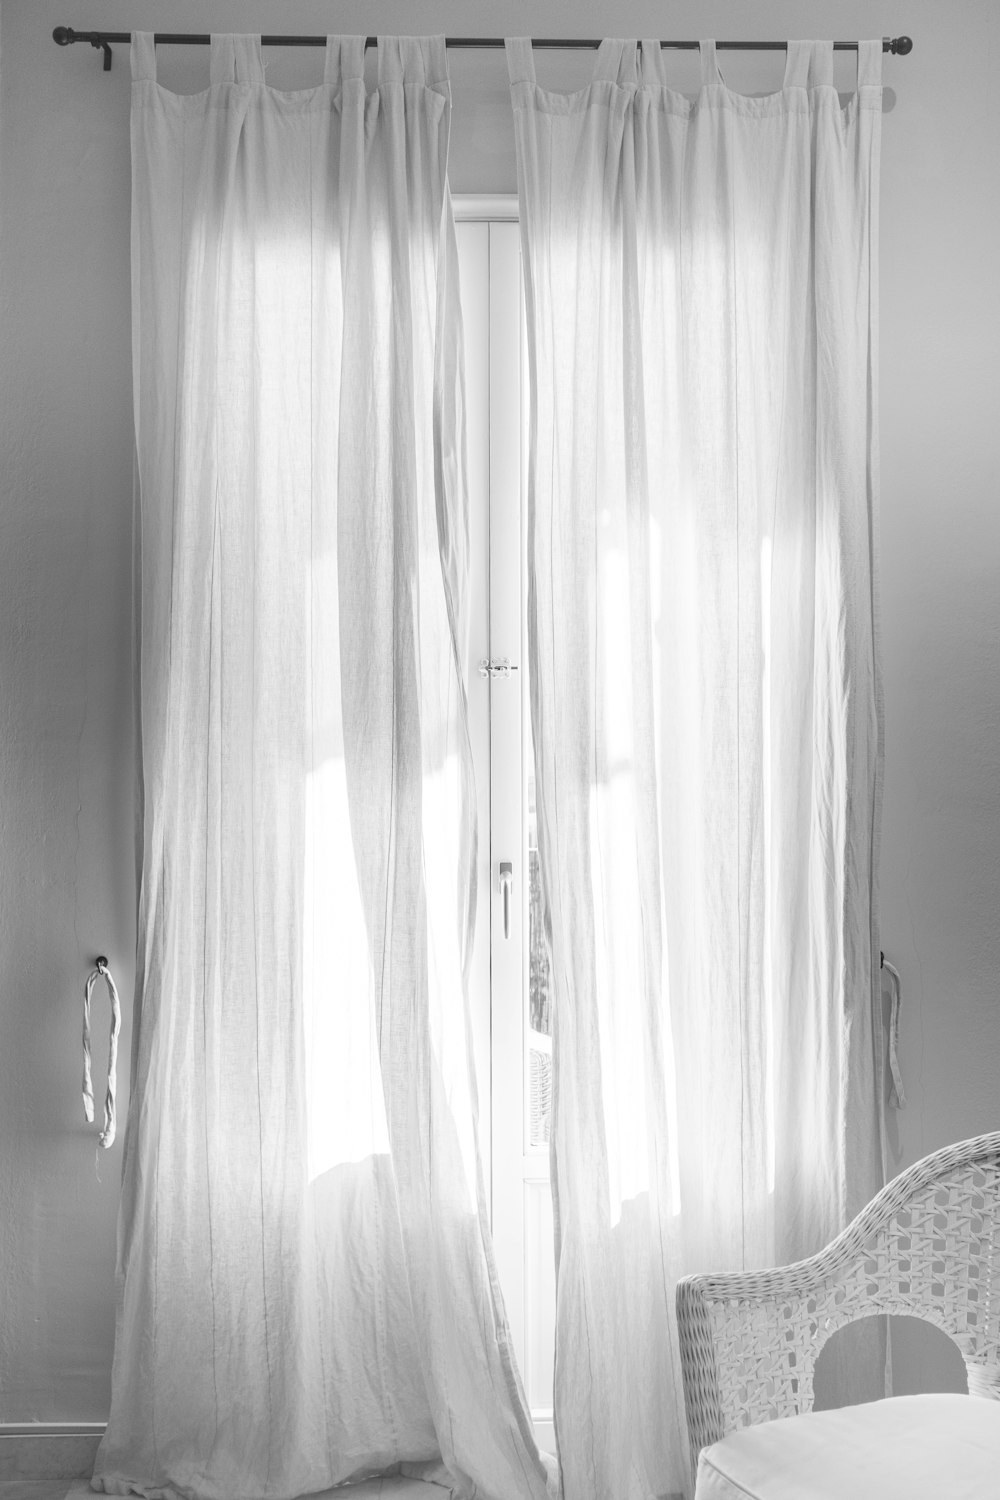 27 Curtain Pictures Download Free Images On Unsplash